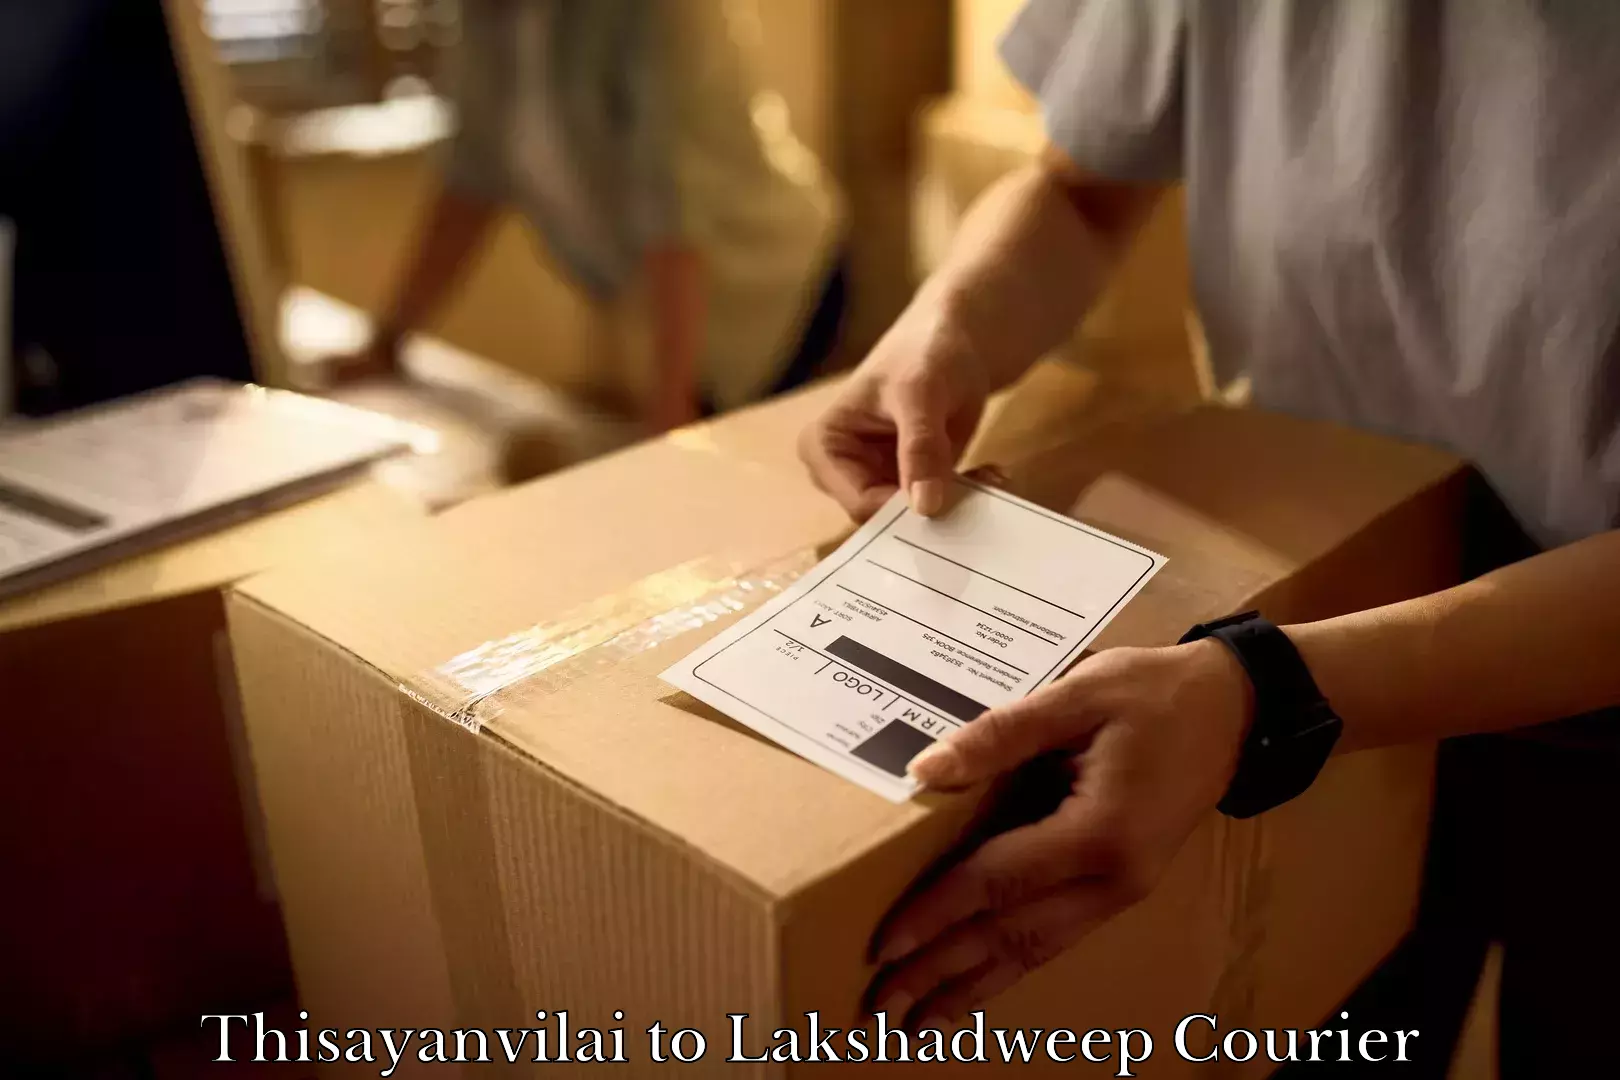 Furniture delivery service Thisayanvilai to Lakshadweep